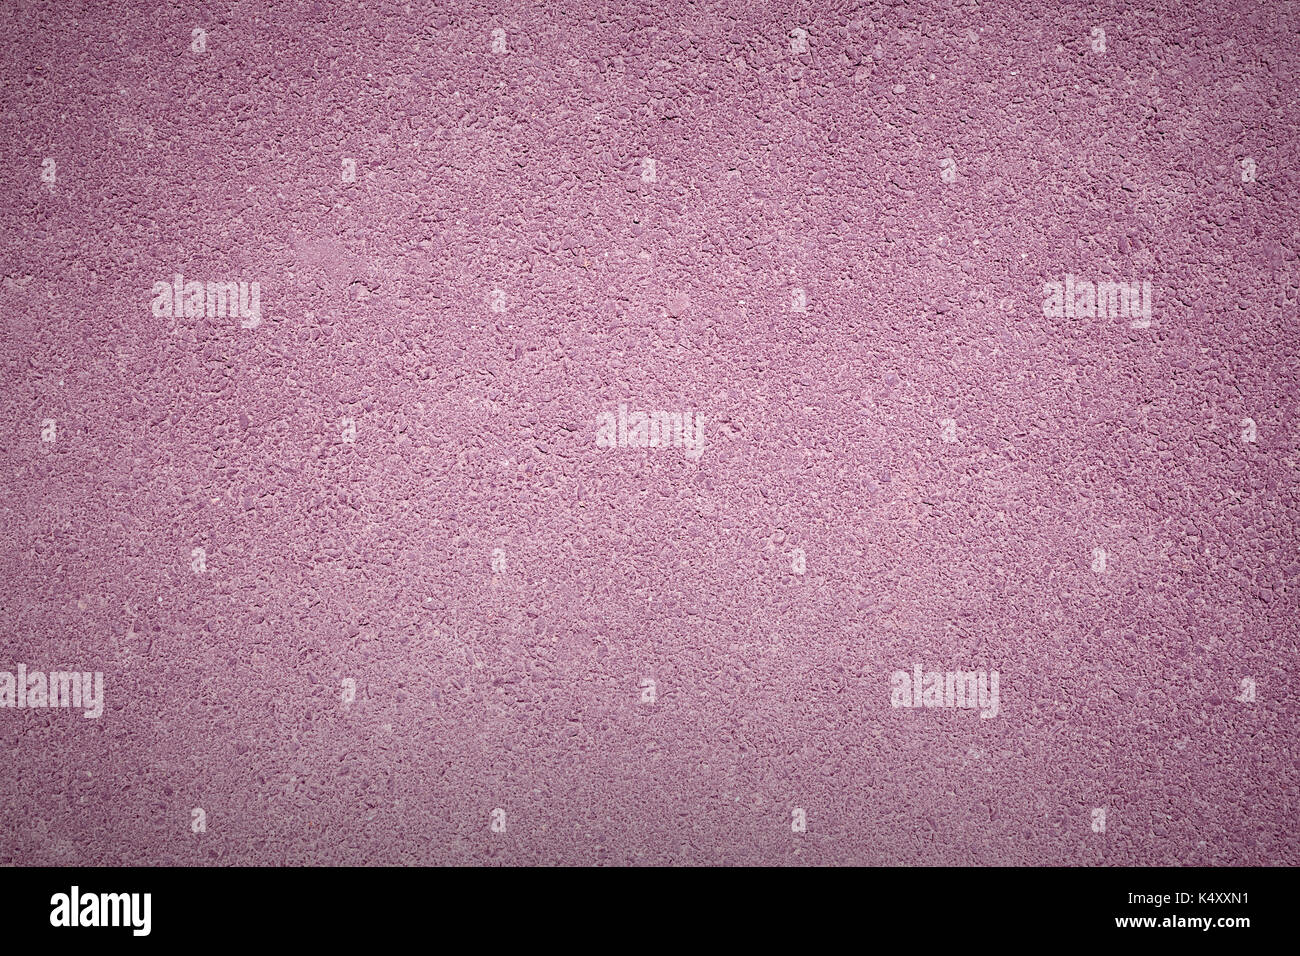 Lilac background texture of rough asphalt, top view Stock Photo